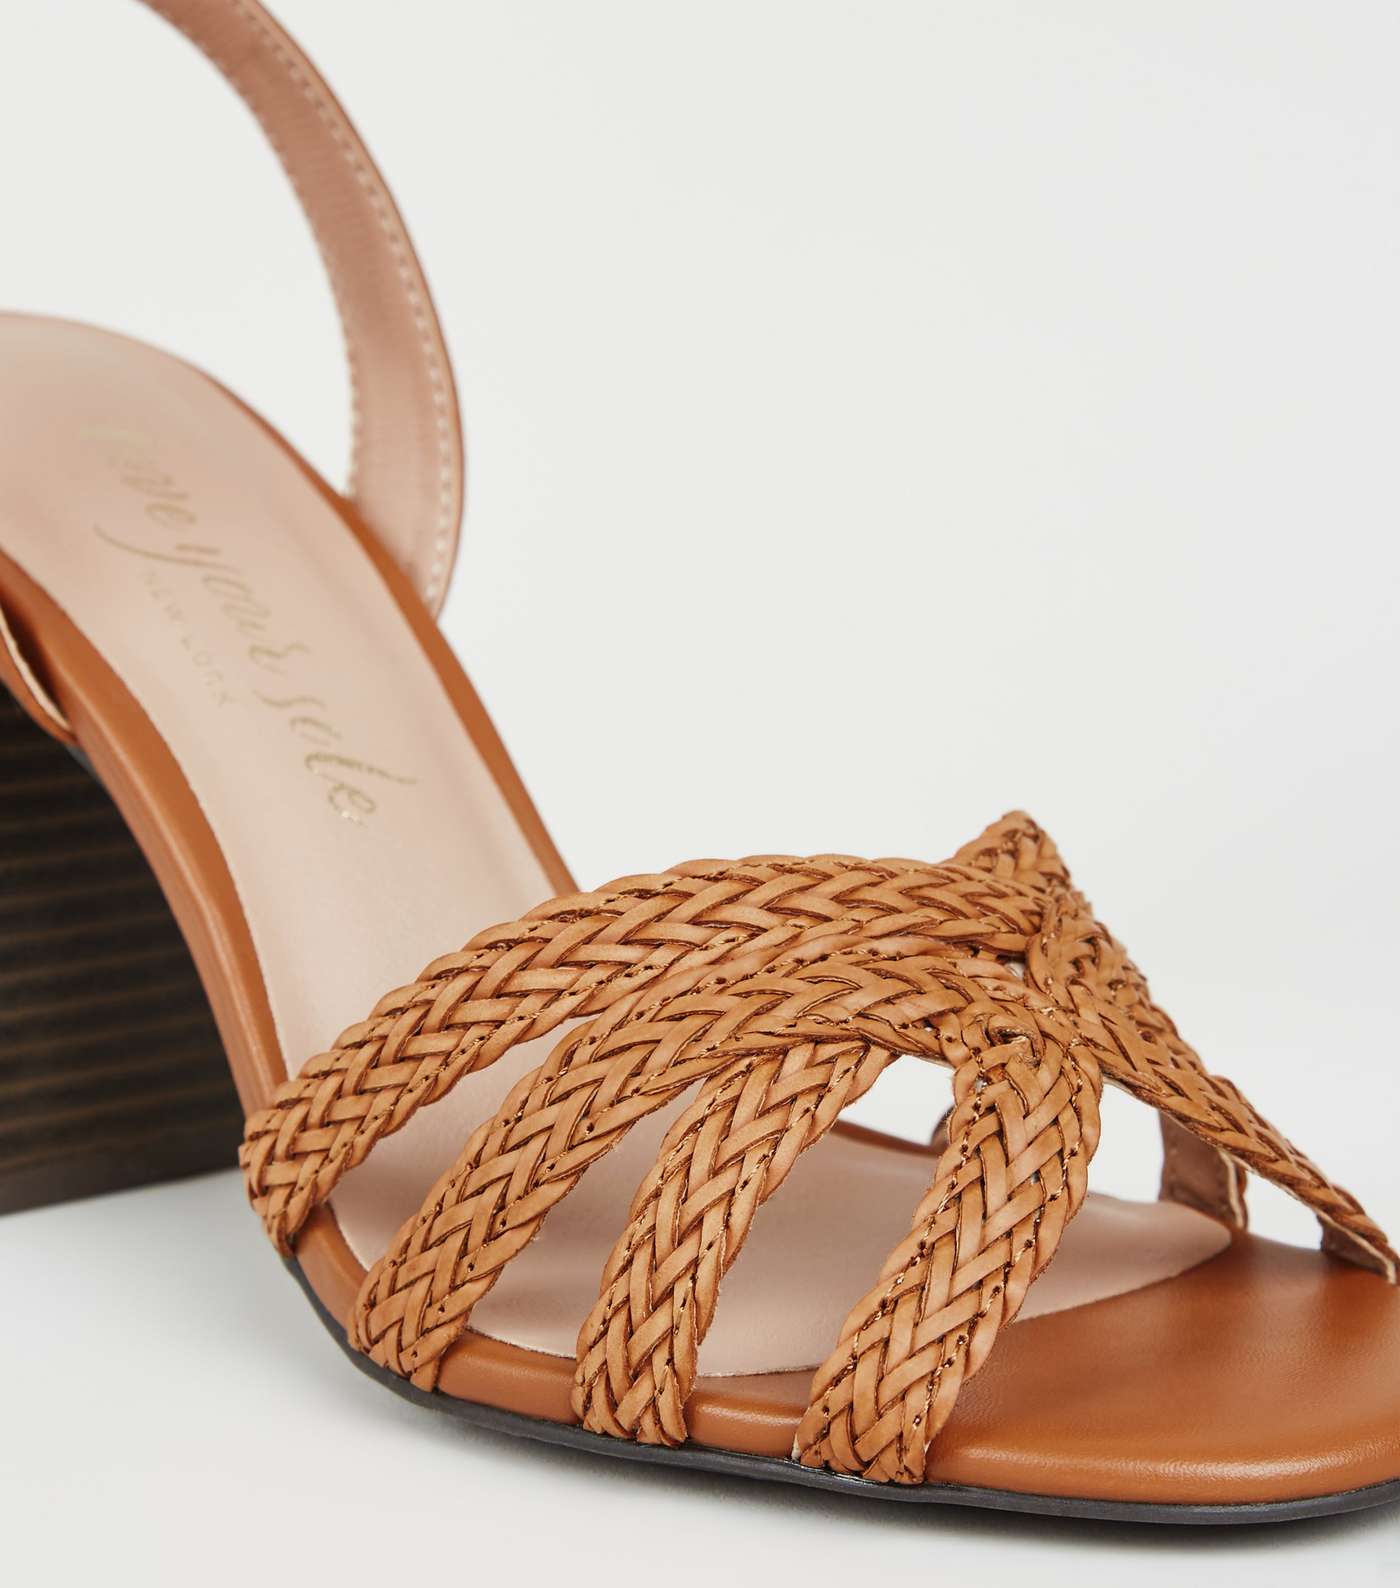 Tan Woven Strap Wood Flare Heel Sandals Image 4